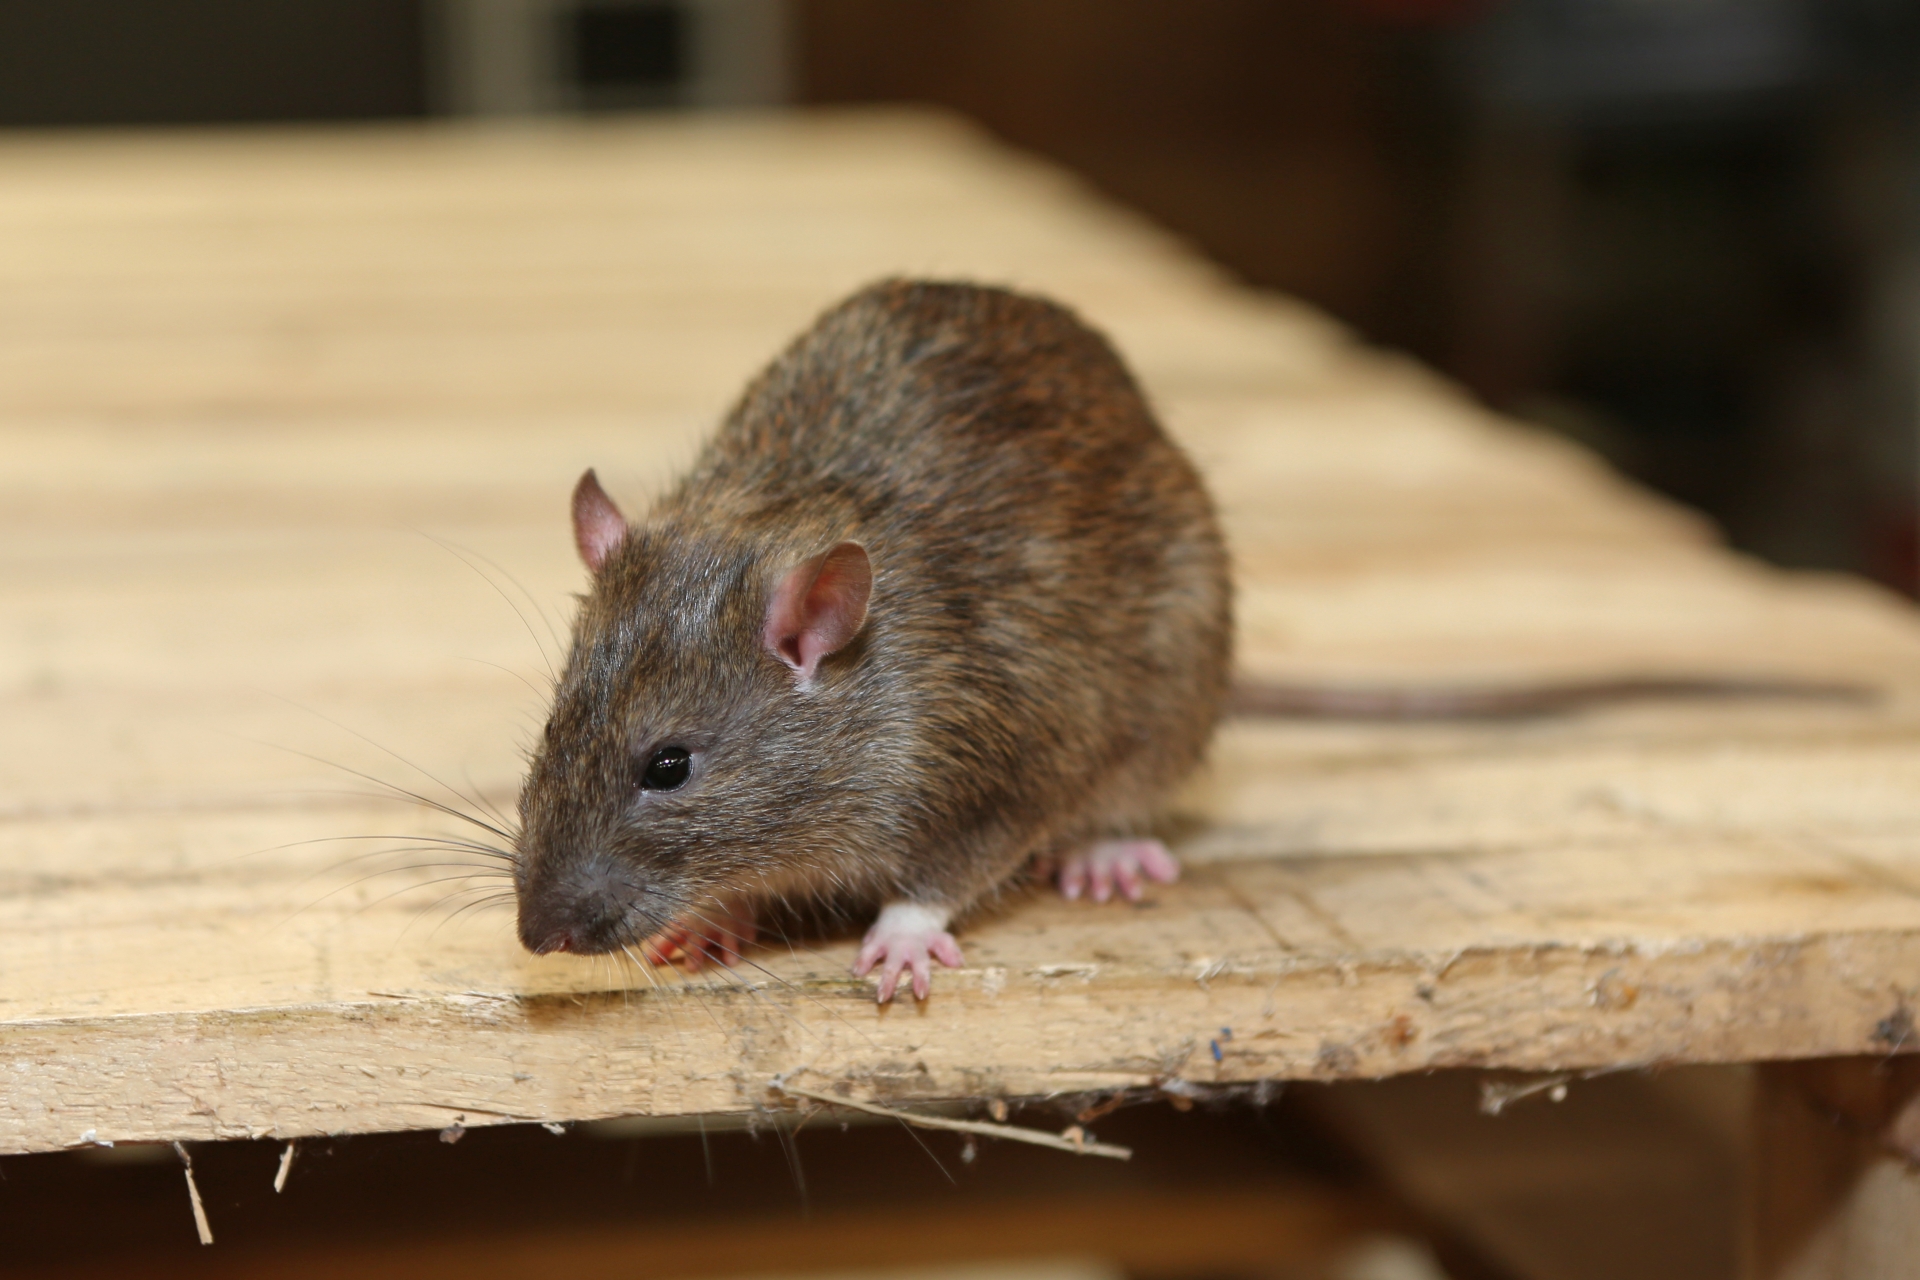 Rat Control, Pest Control in Mill Hill, NW7. Call Now 020 8166 9746